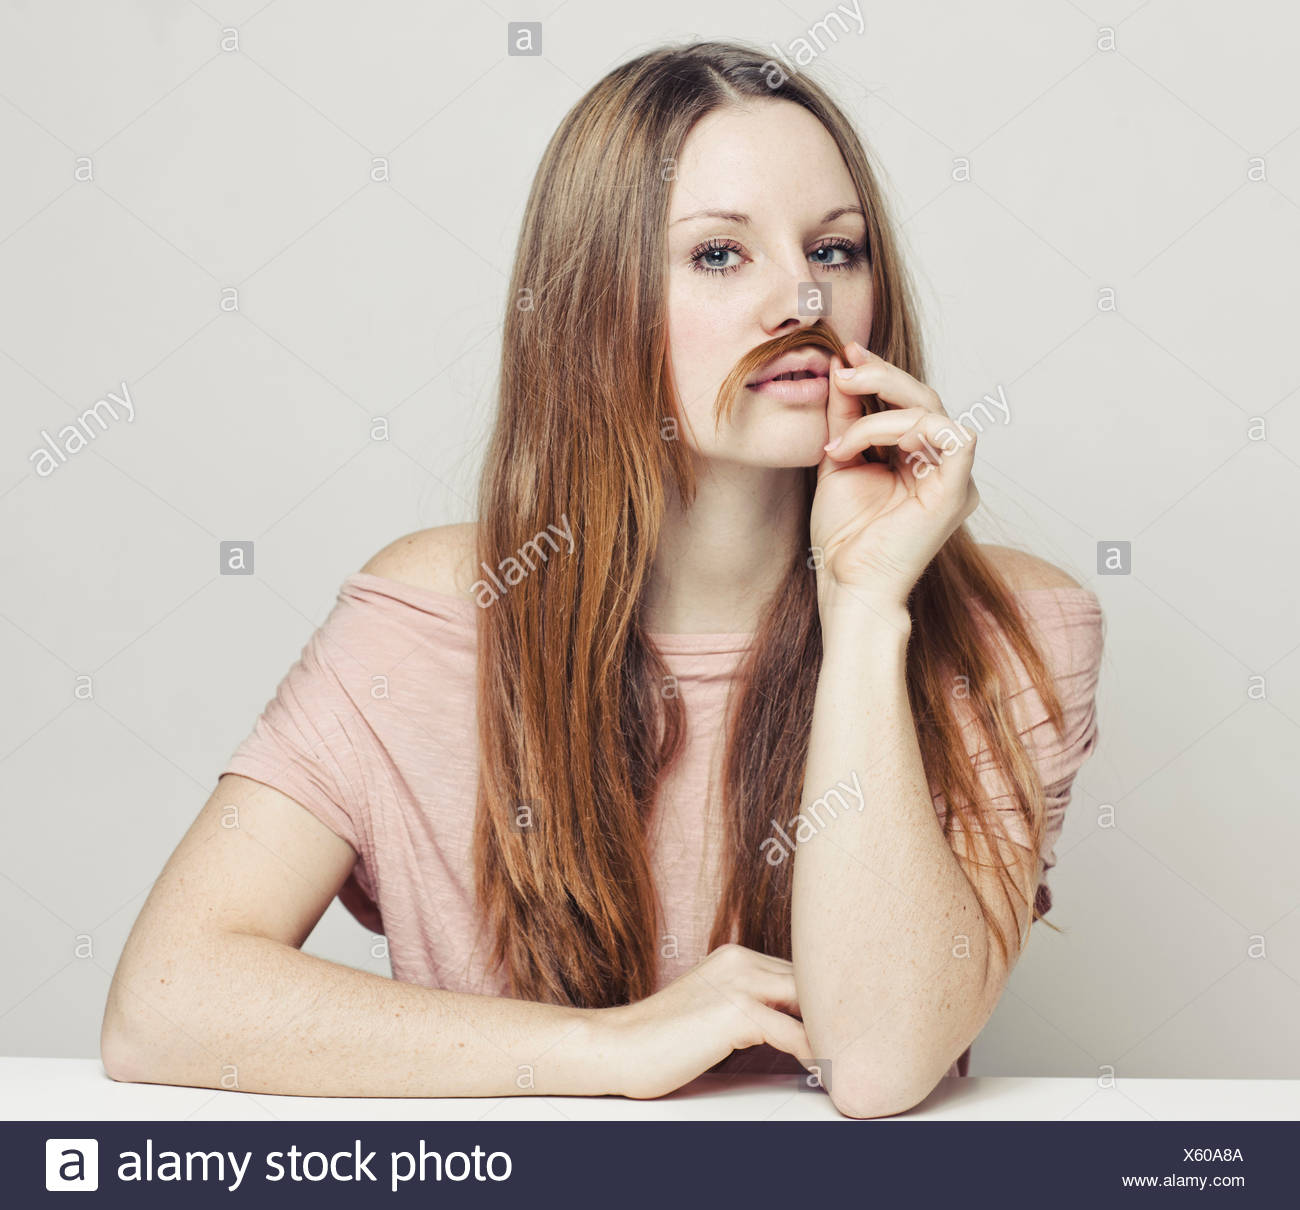 Woman Playing With Hair As Mustache Stock Photo 279061898 Alamy